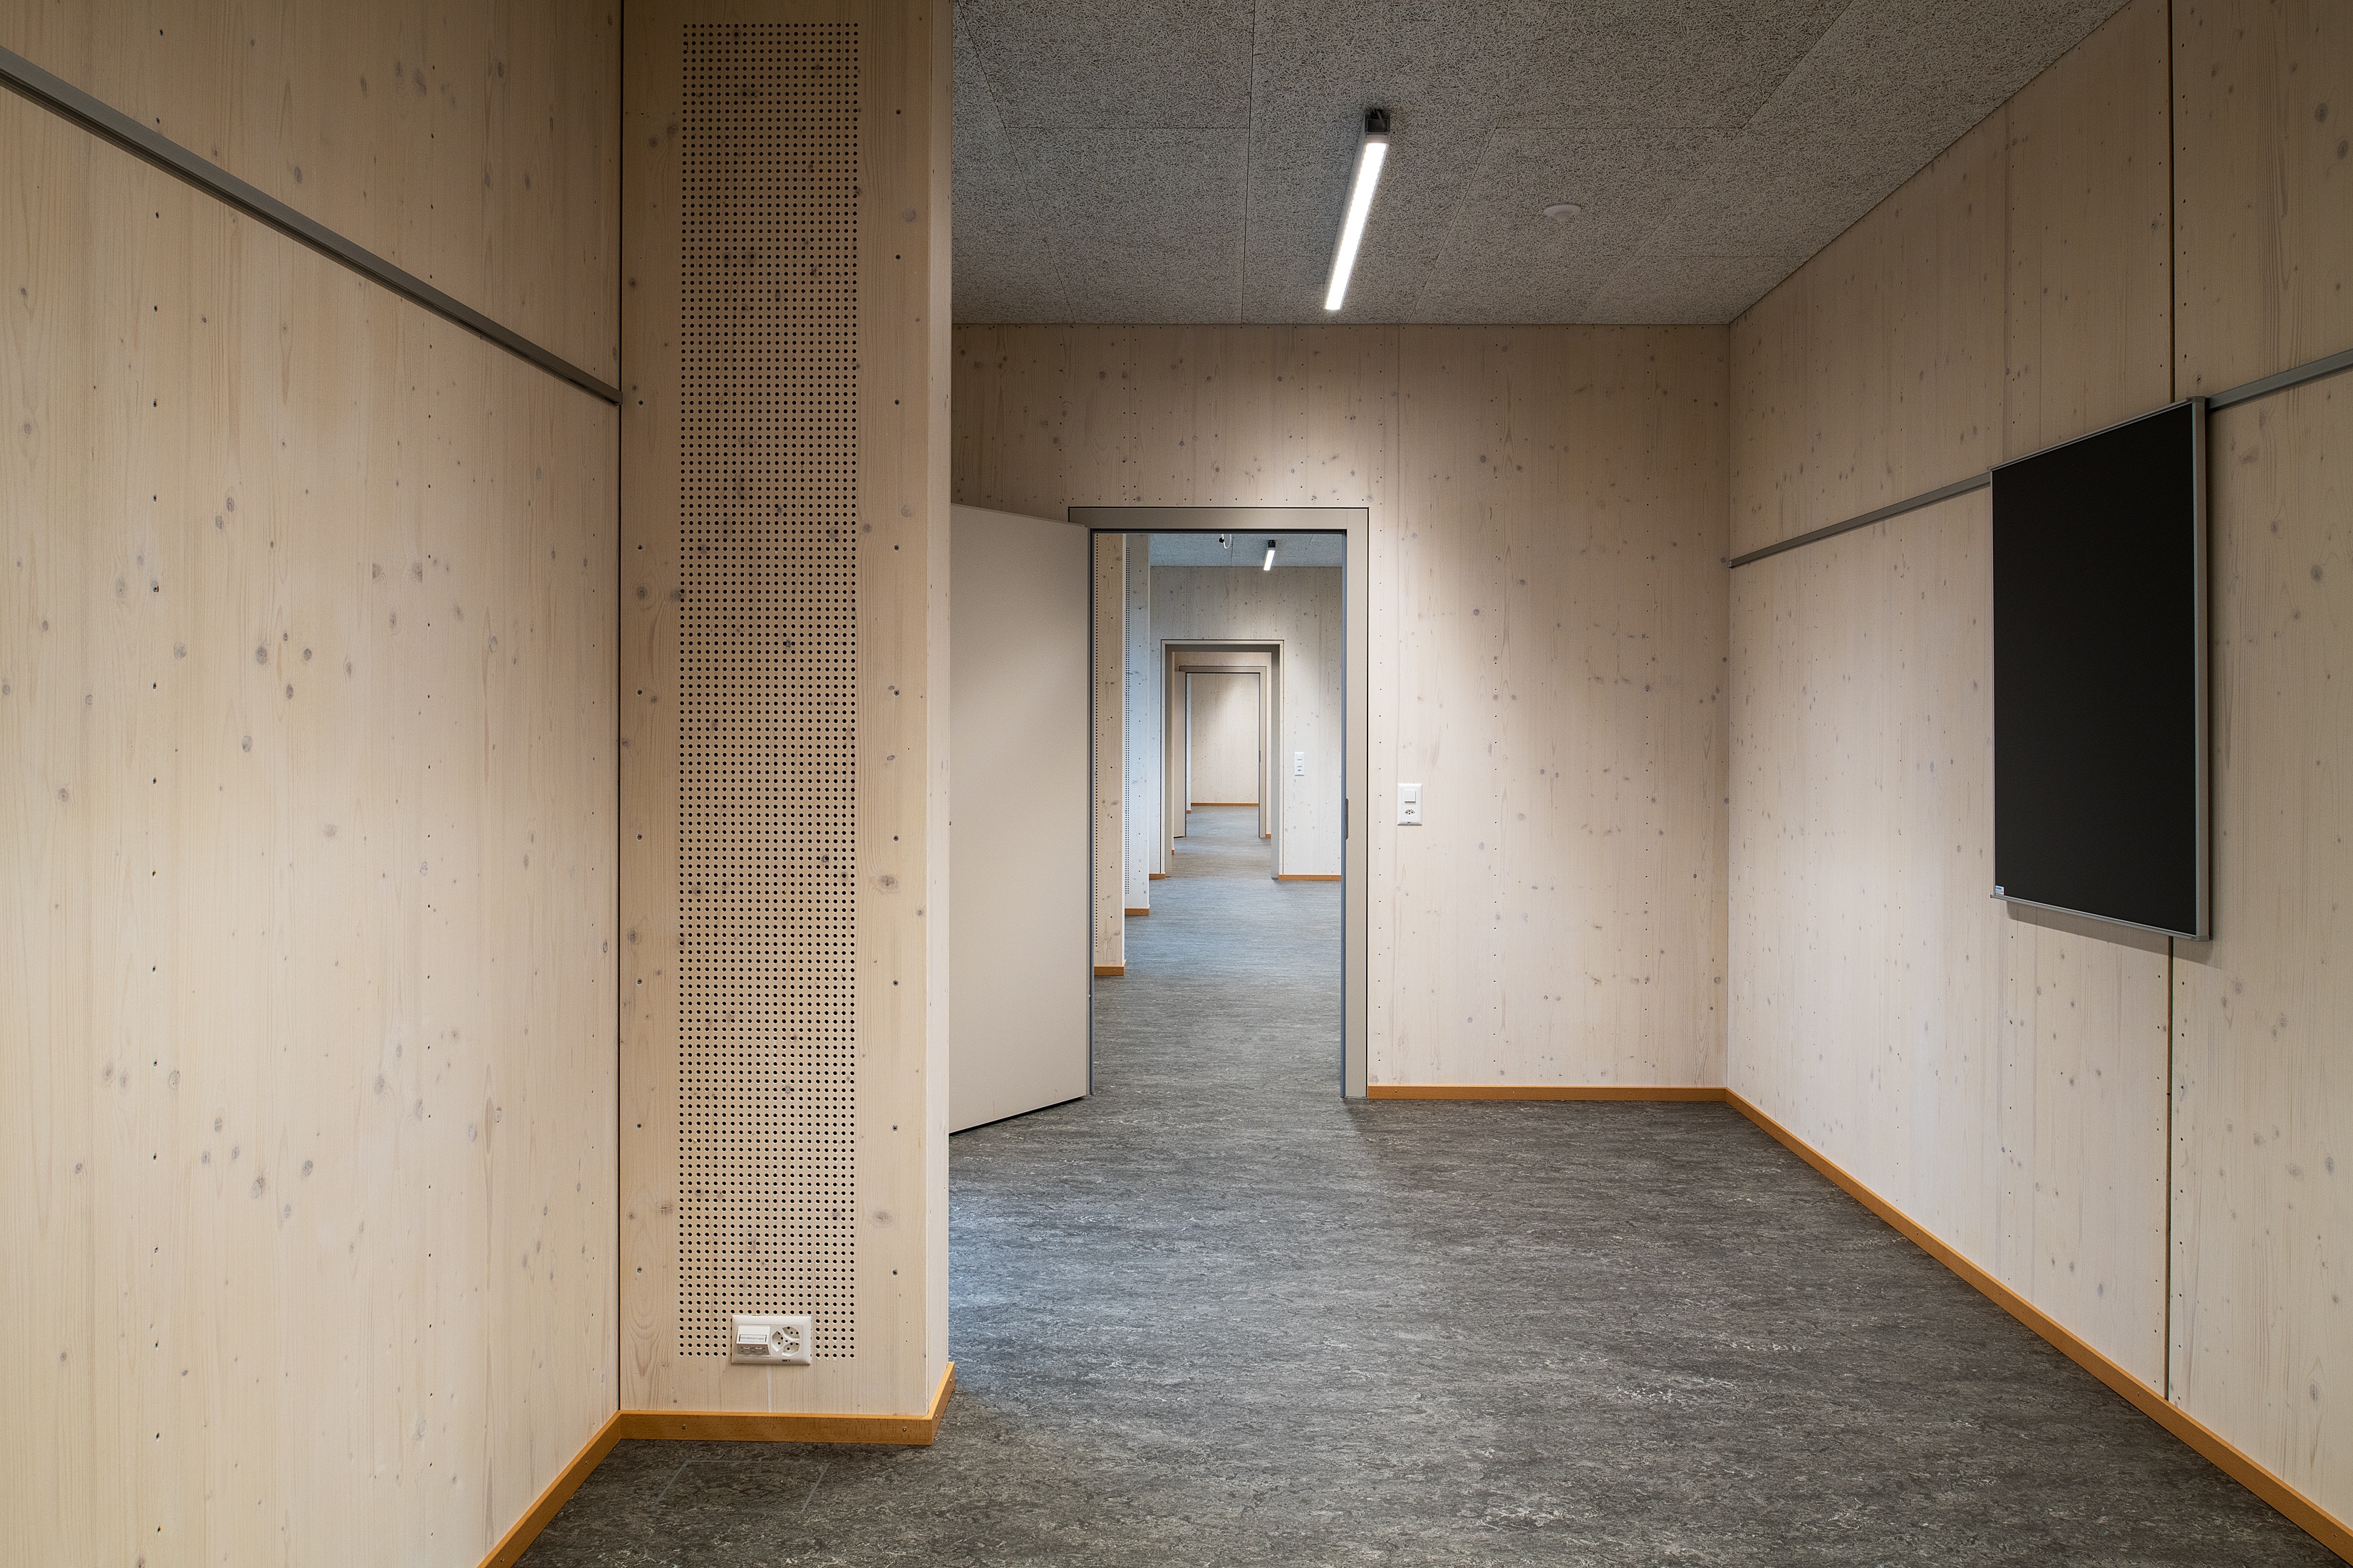 Corridor with timber walls in the temporary Falletsche school building